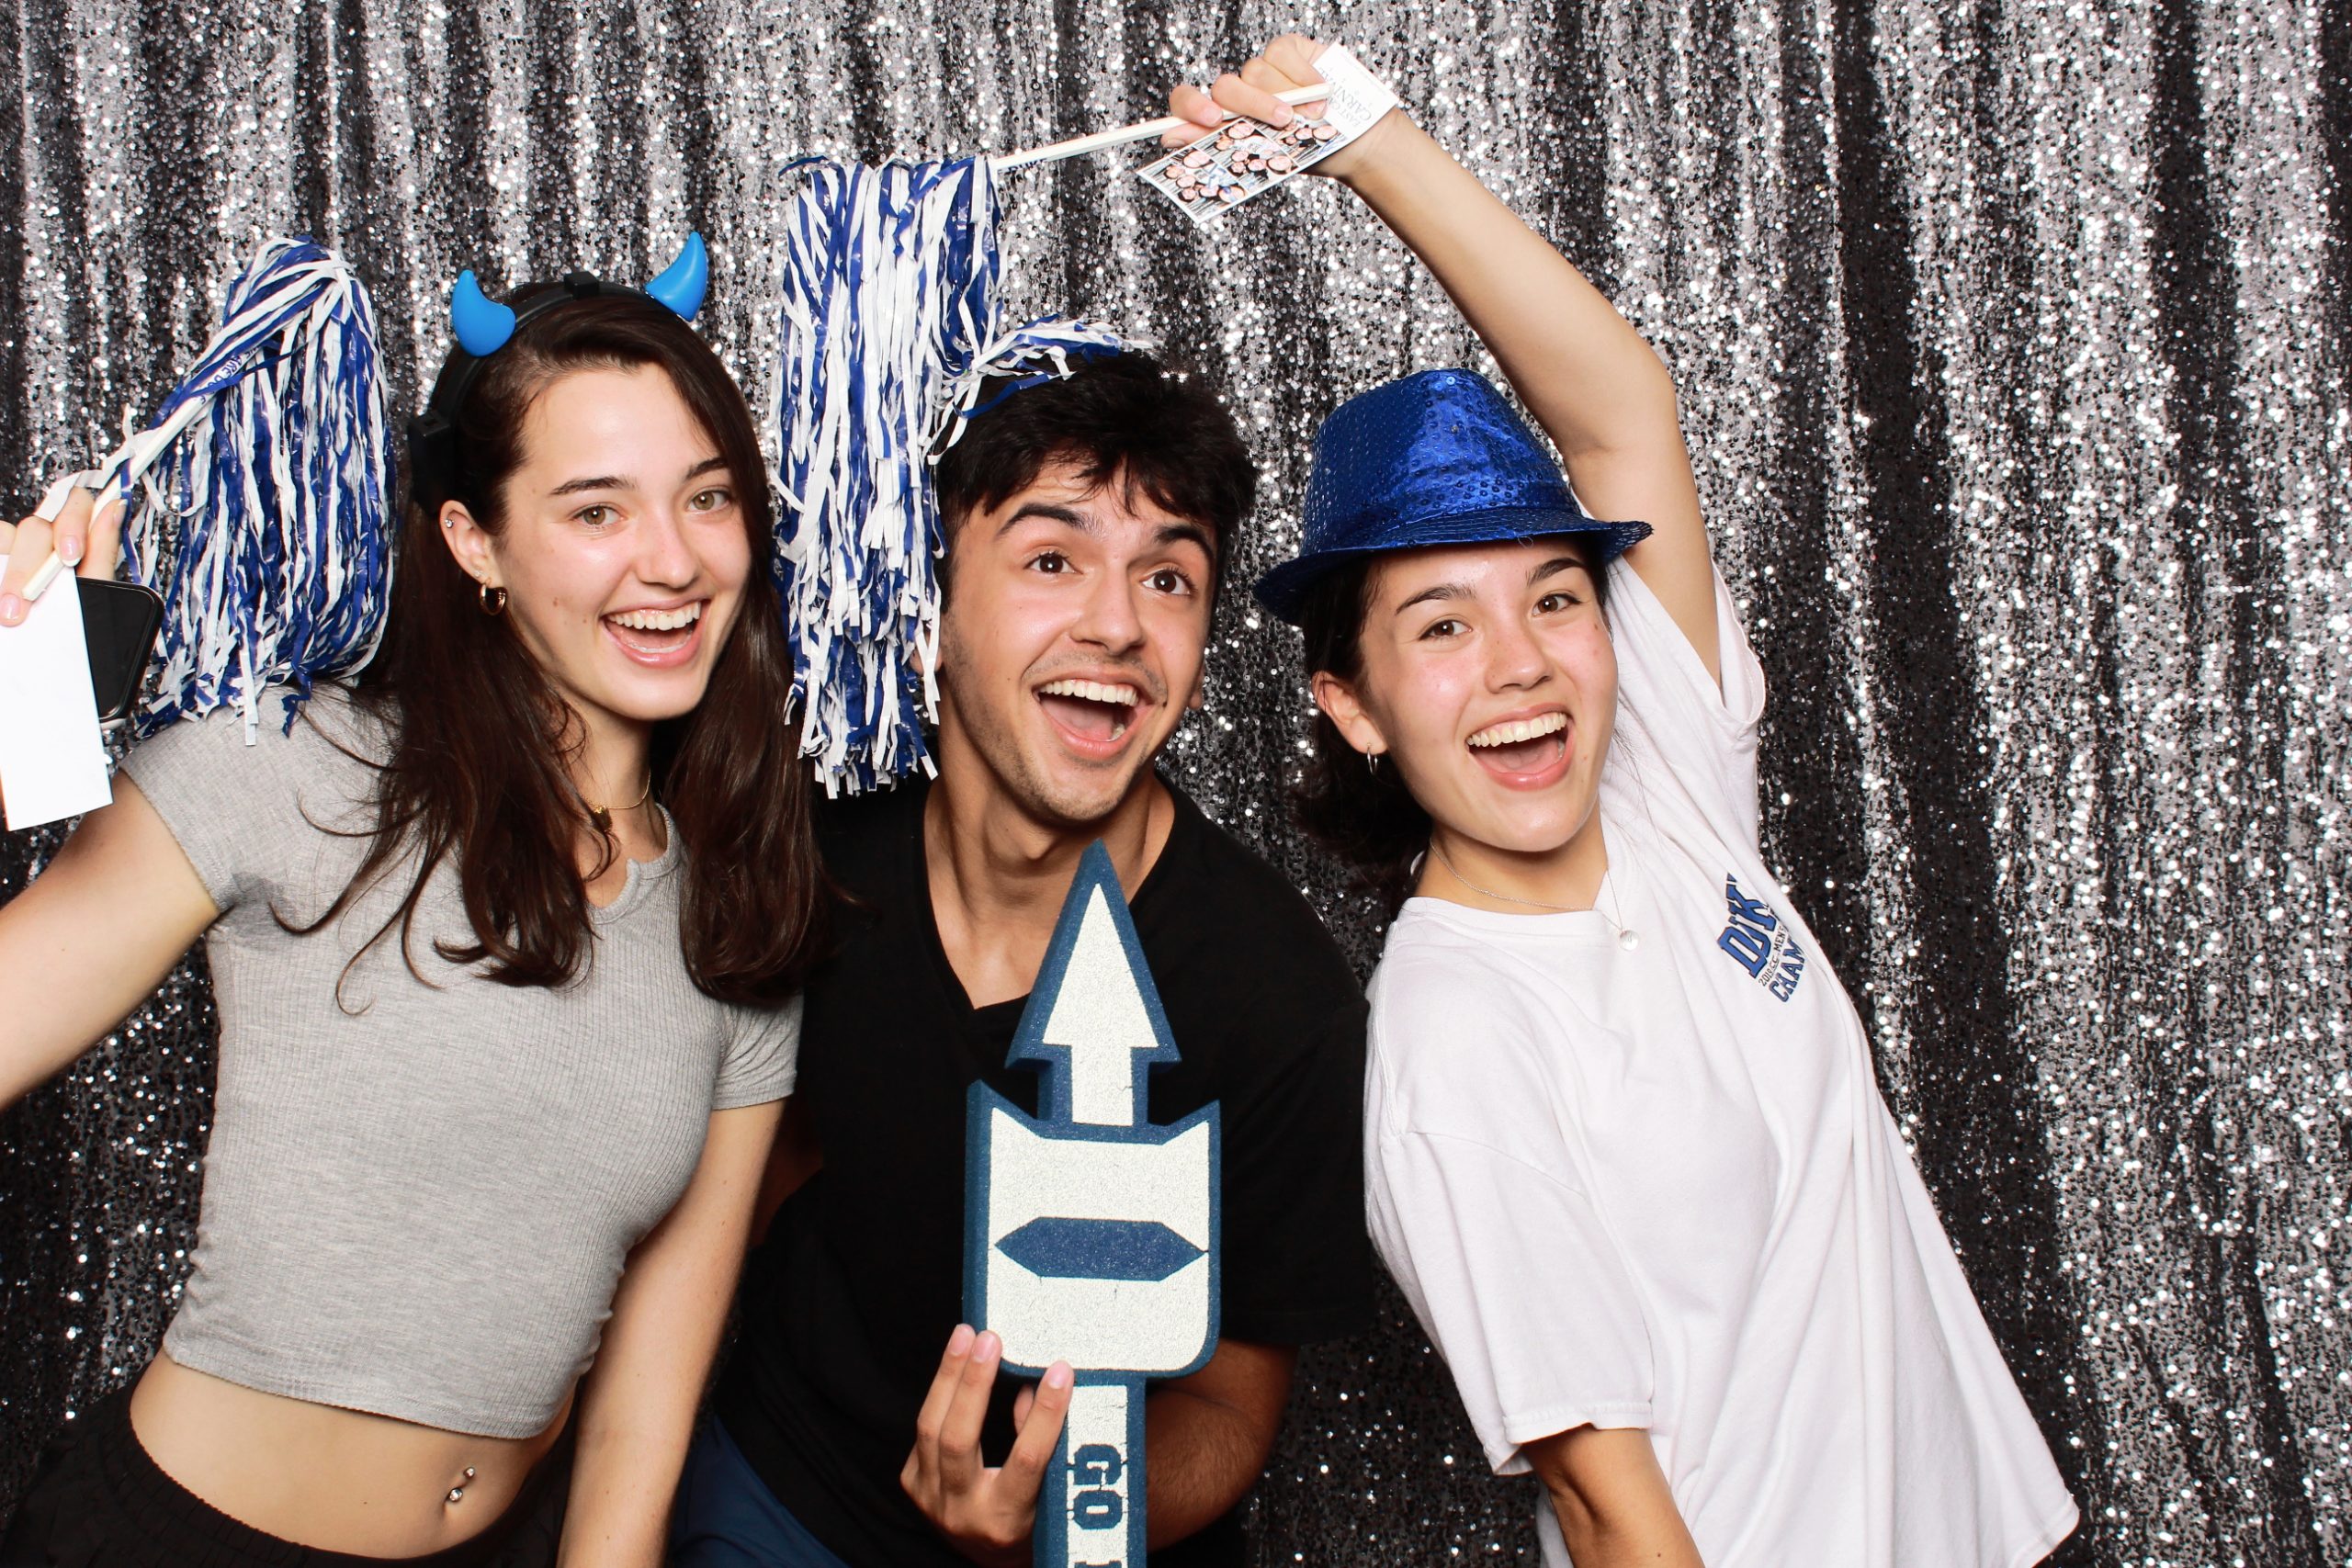 students pose in photo booth with props